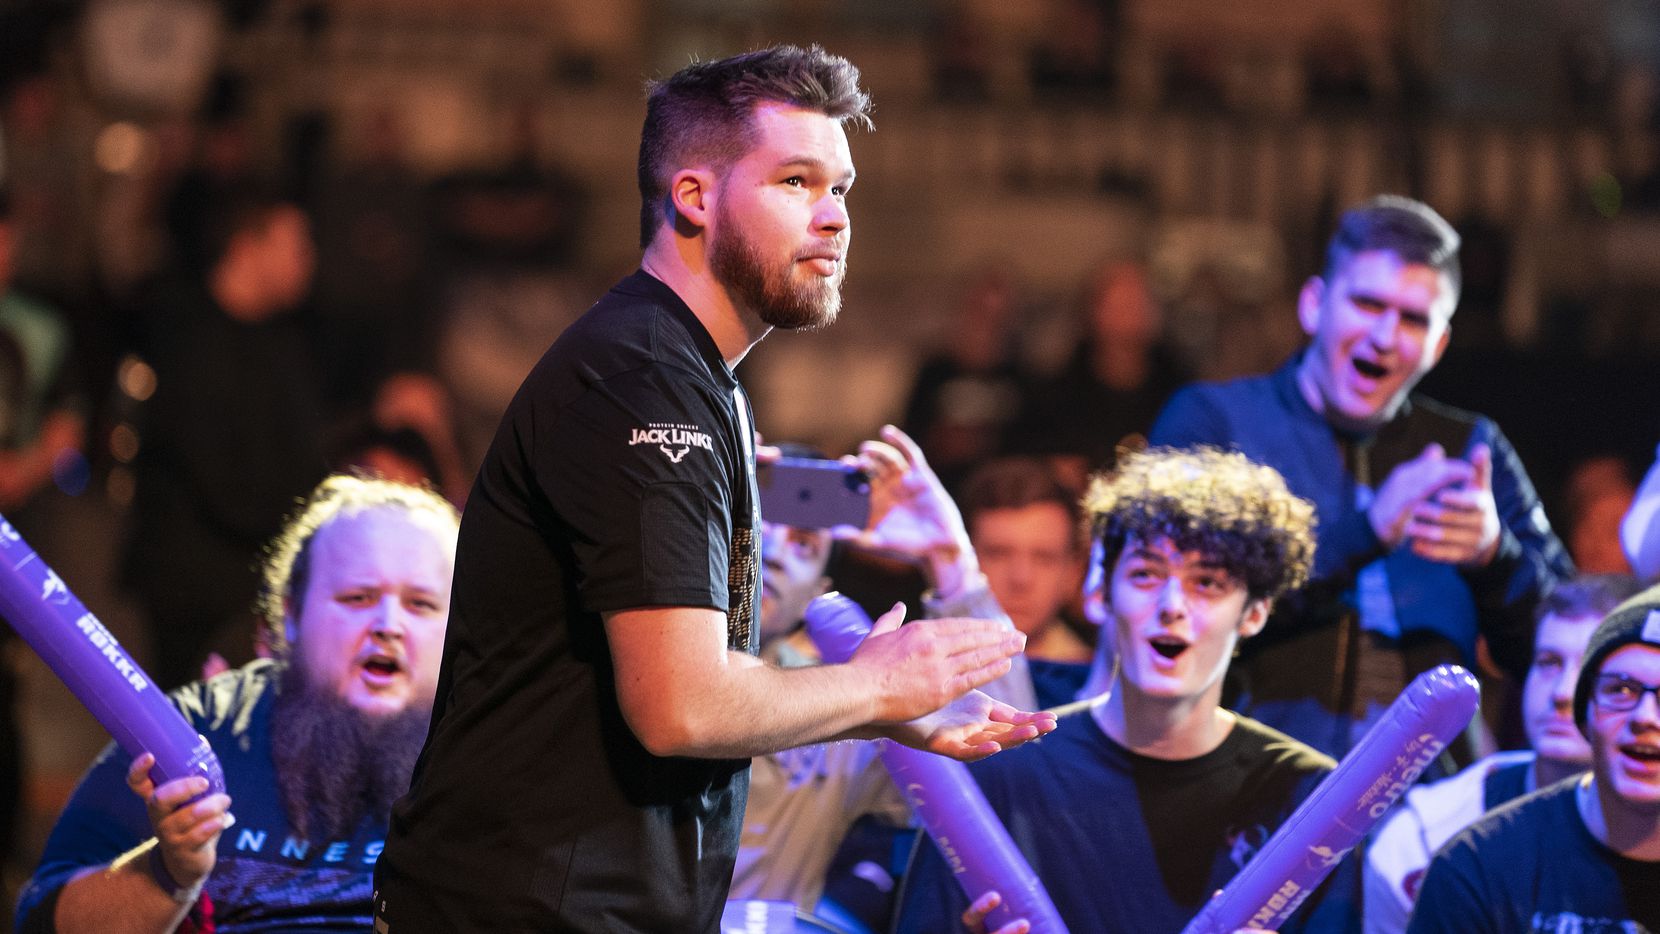 Fans cheer for Crimsix (Ian Porter) as he takes the stage before Dallas Empire competes against Chicago Huntsmen in the Call of Duty League Launch Weekend at the Armory in Minneapolis, Minn., January 24, 2020.